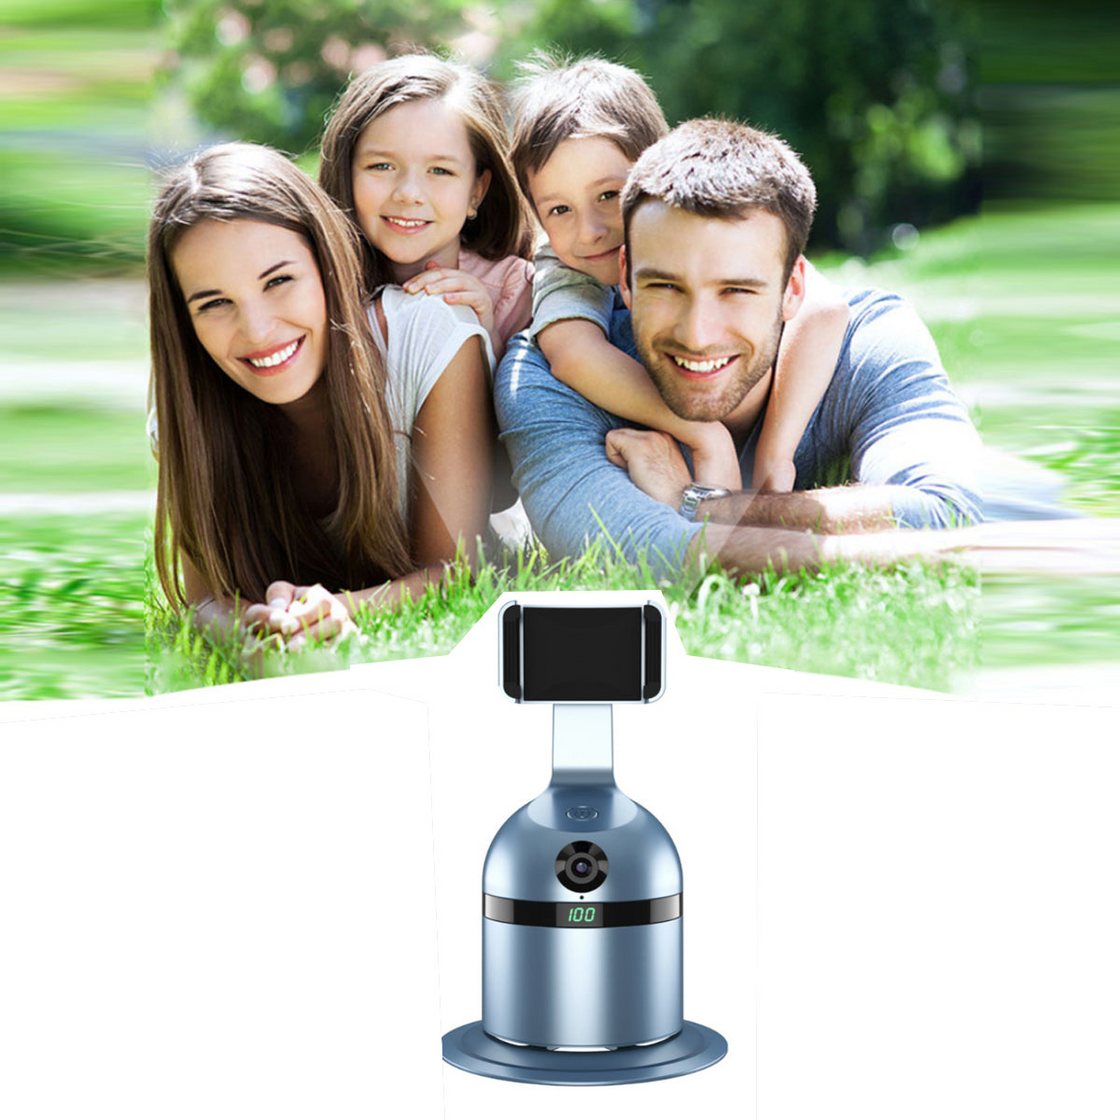 3-IN-1 360 Self Videographer Bluetooth Speaker and Remote Control - Capture Every Moment with Ease!